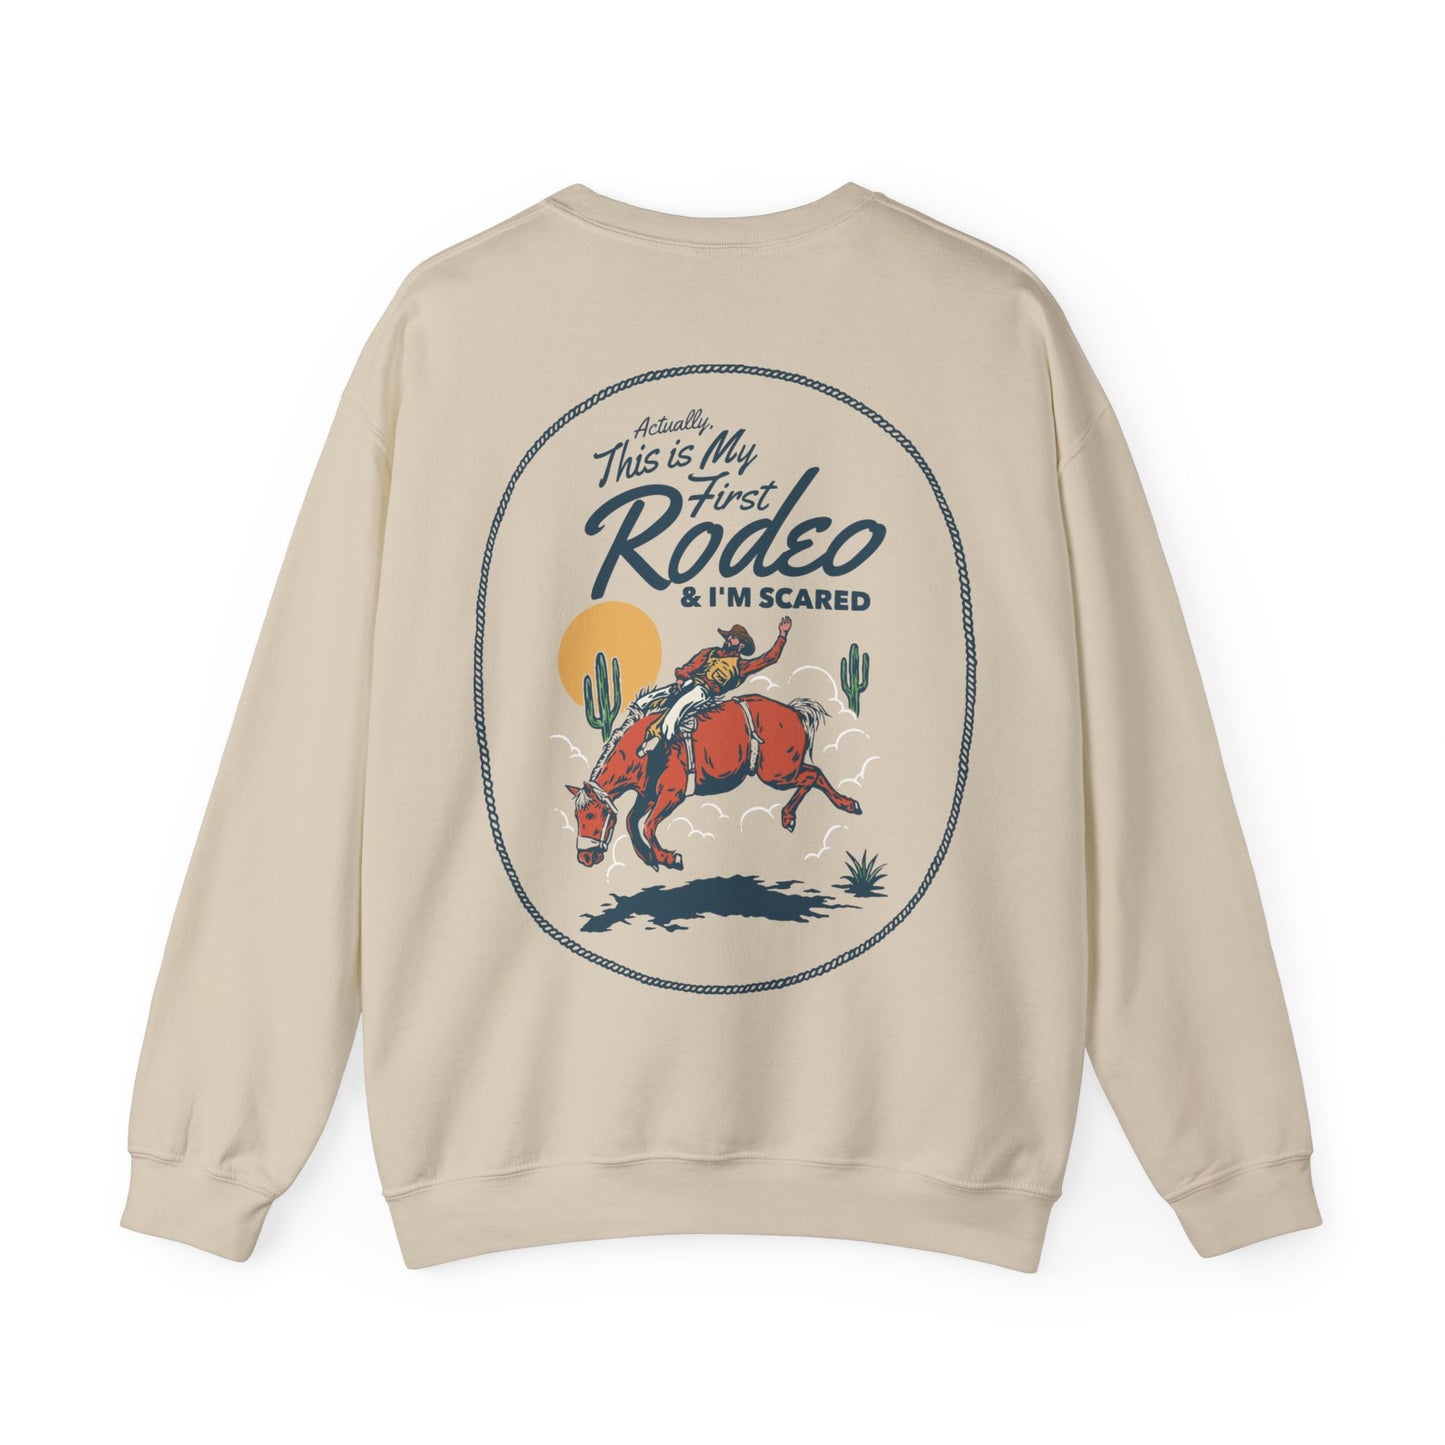 First Rodeo | Unisex Sweatshirt with Back Print